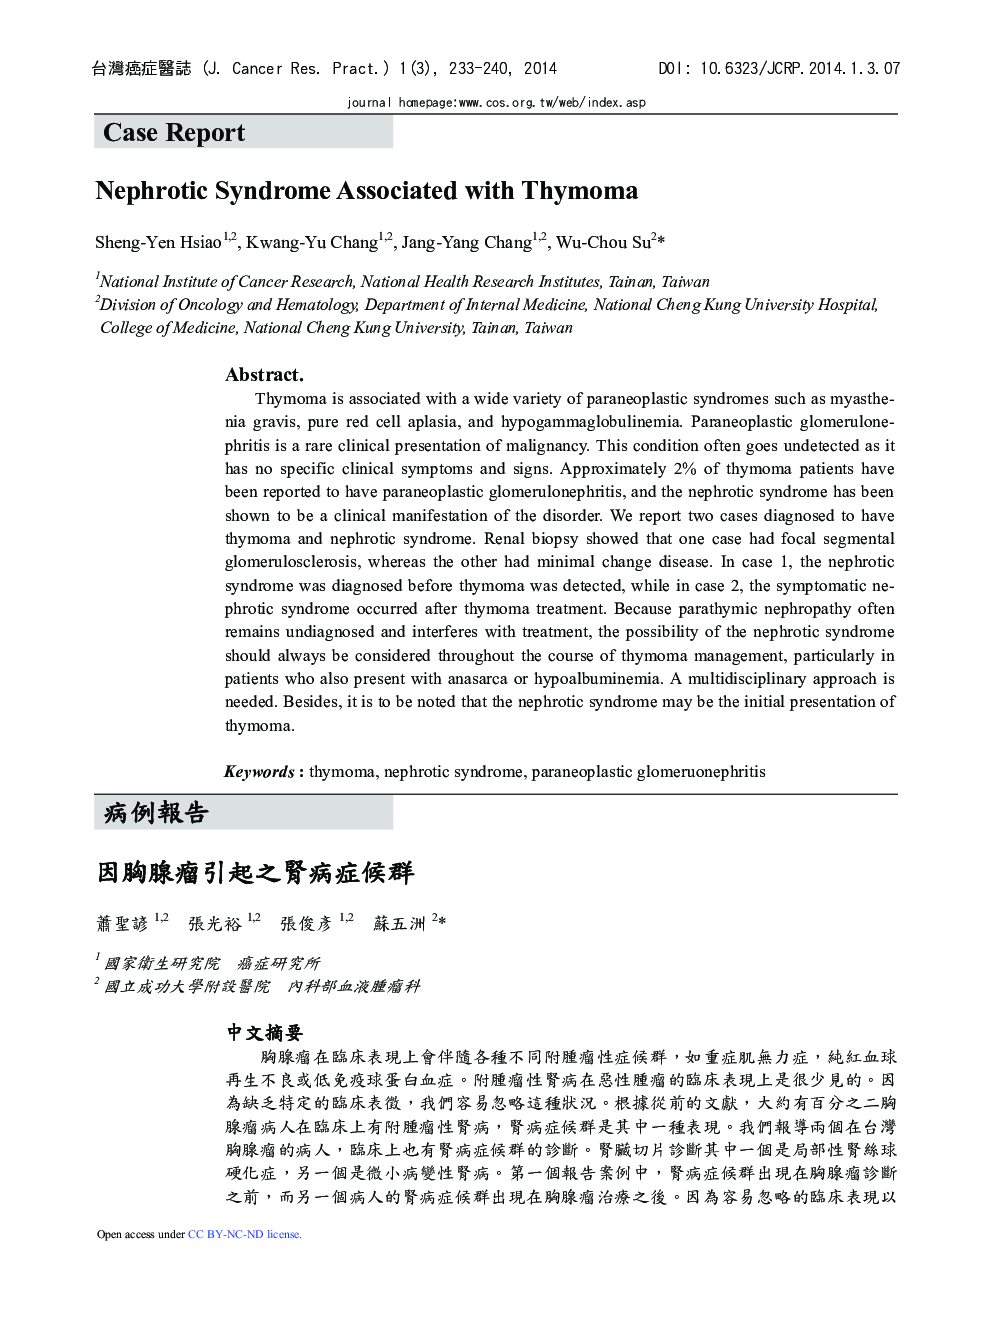 Nephrotic Syndrome Associated with Thymoma